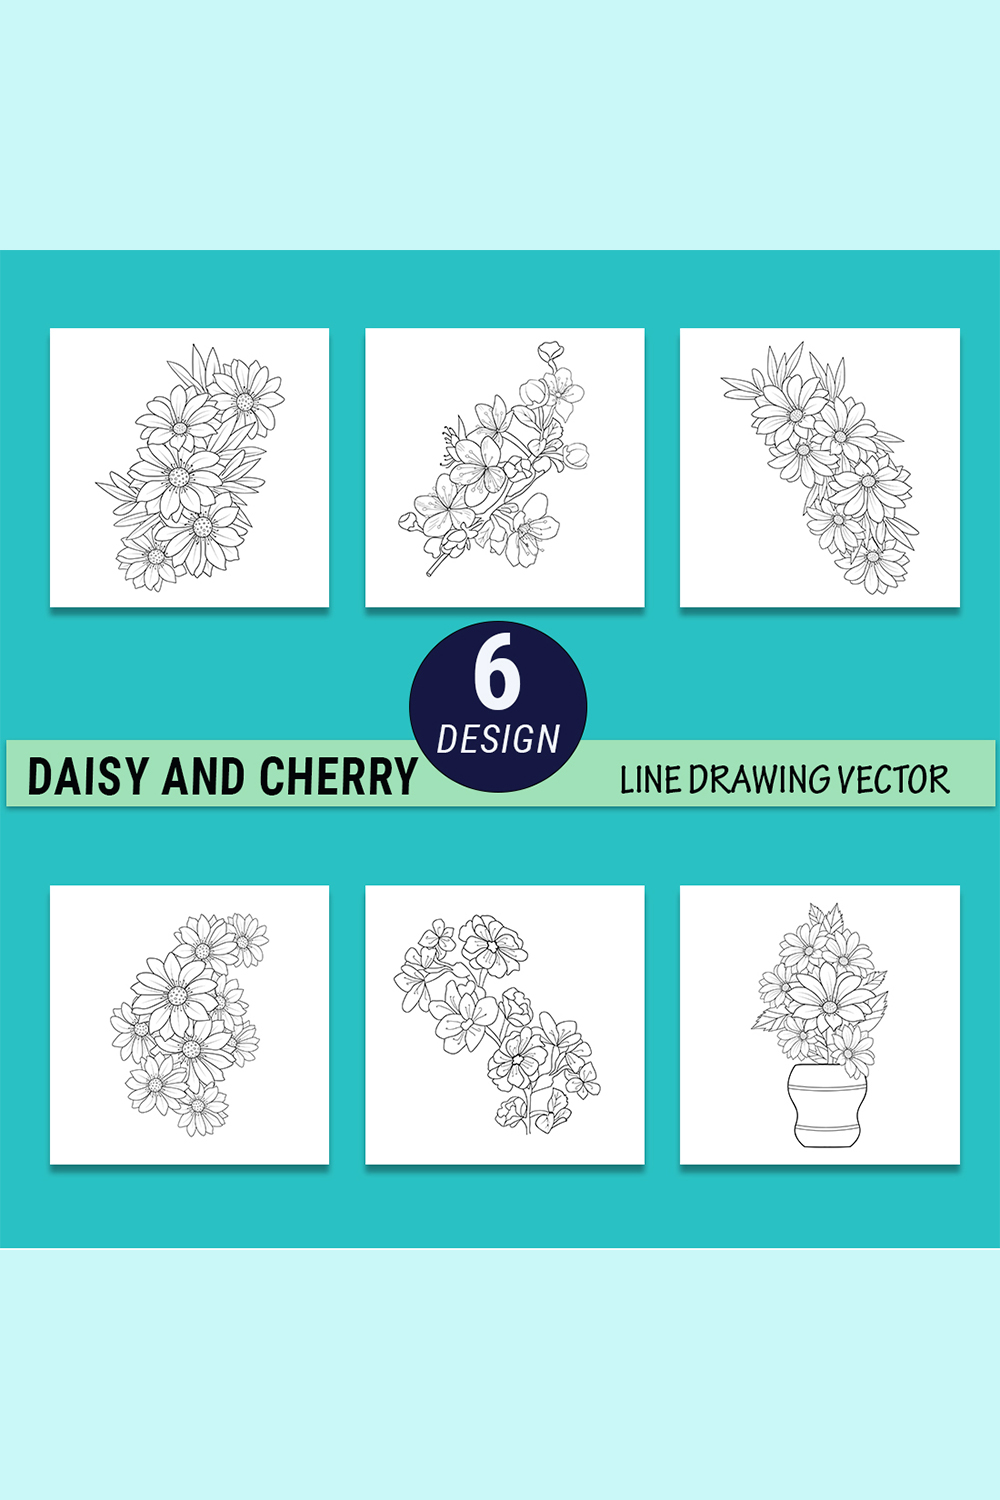 Daisy flower coloring pages, daisy flower bouquet tattoo, small daisy tattoo, cherry blossom tattoo black and white, cherry blossom drawing pencil pinterest preview image.